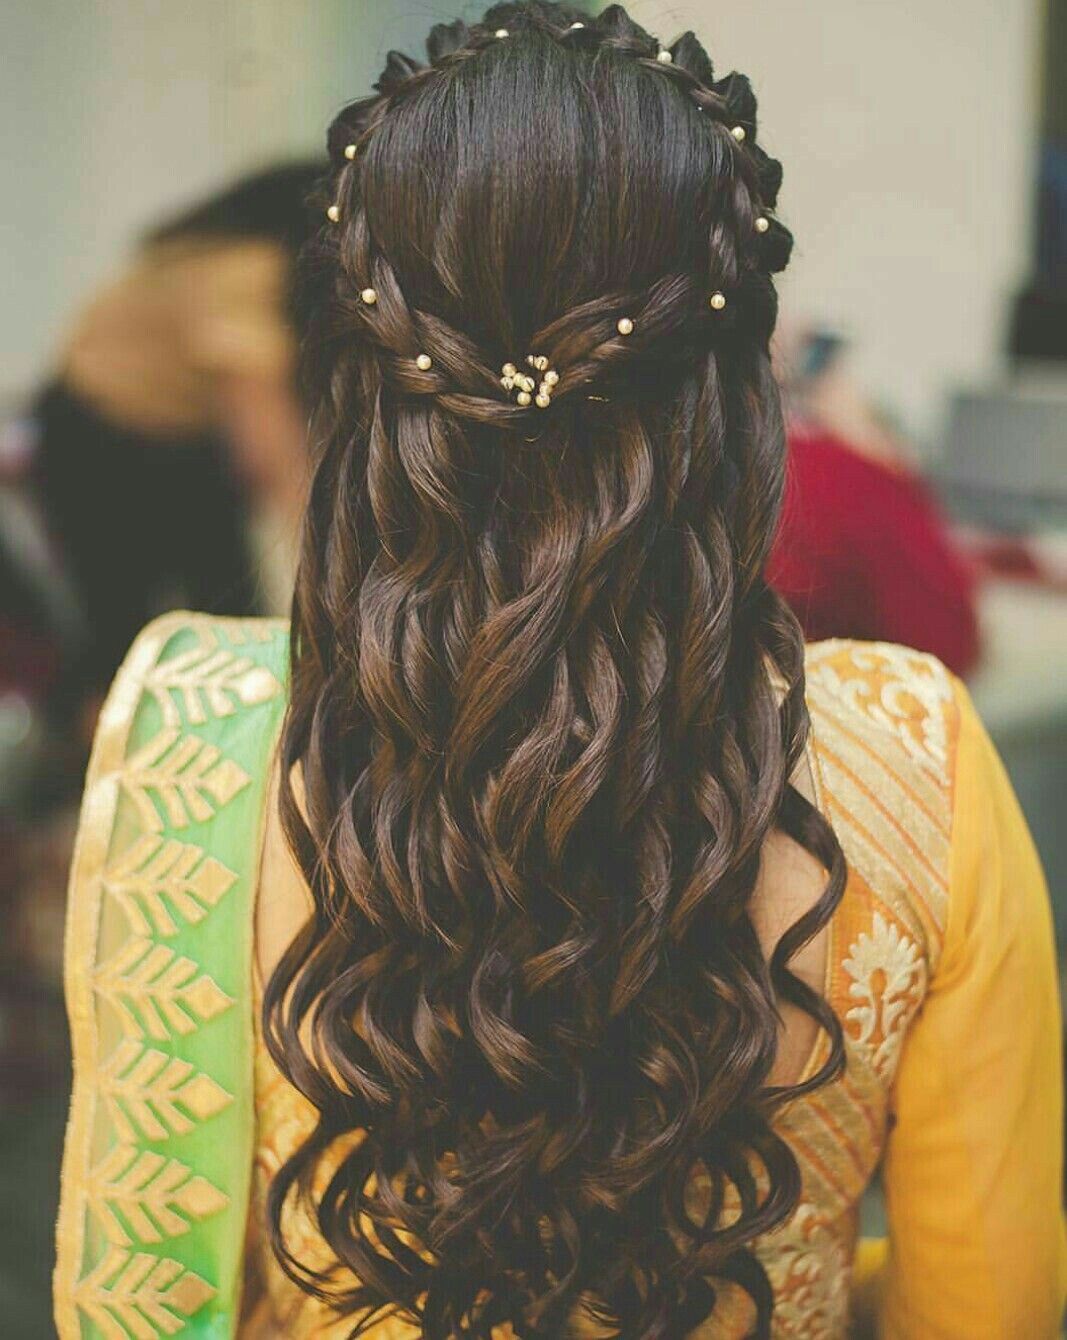 32 Stunning Mother of the Bride Hairstyles for 2020 - hitched.co.uk -  hitched.co.uk